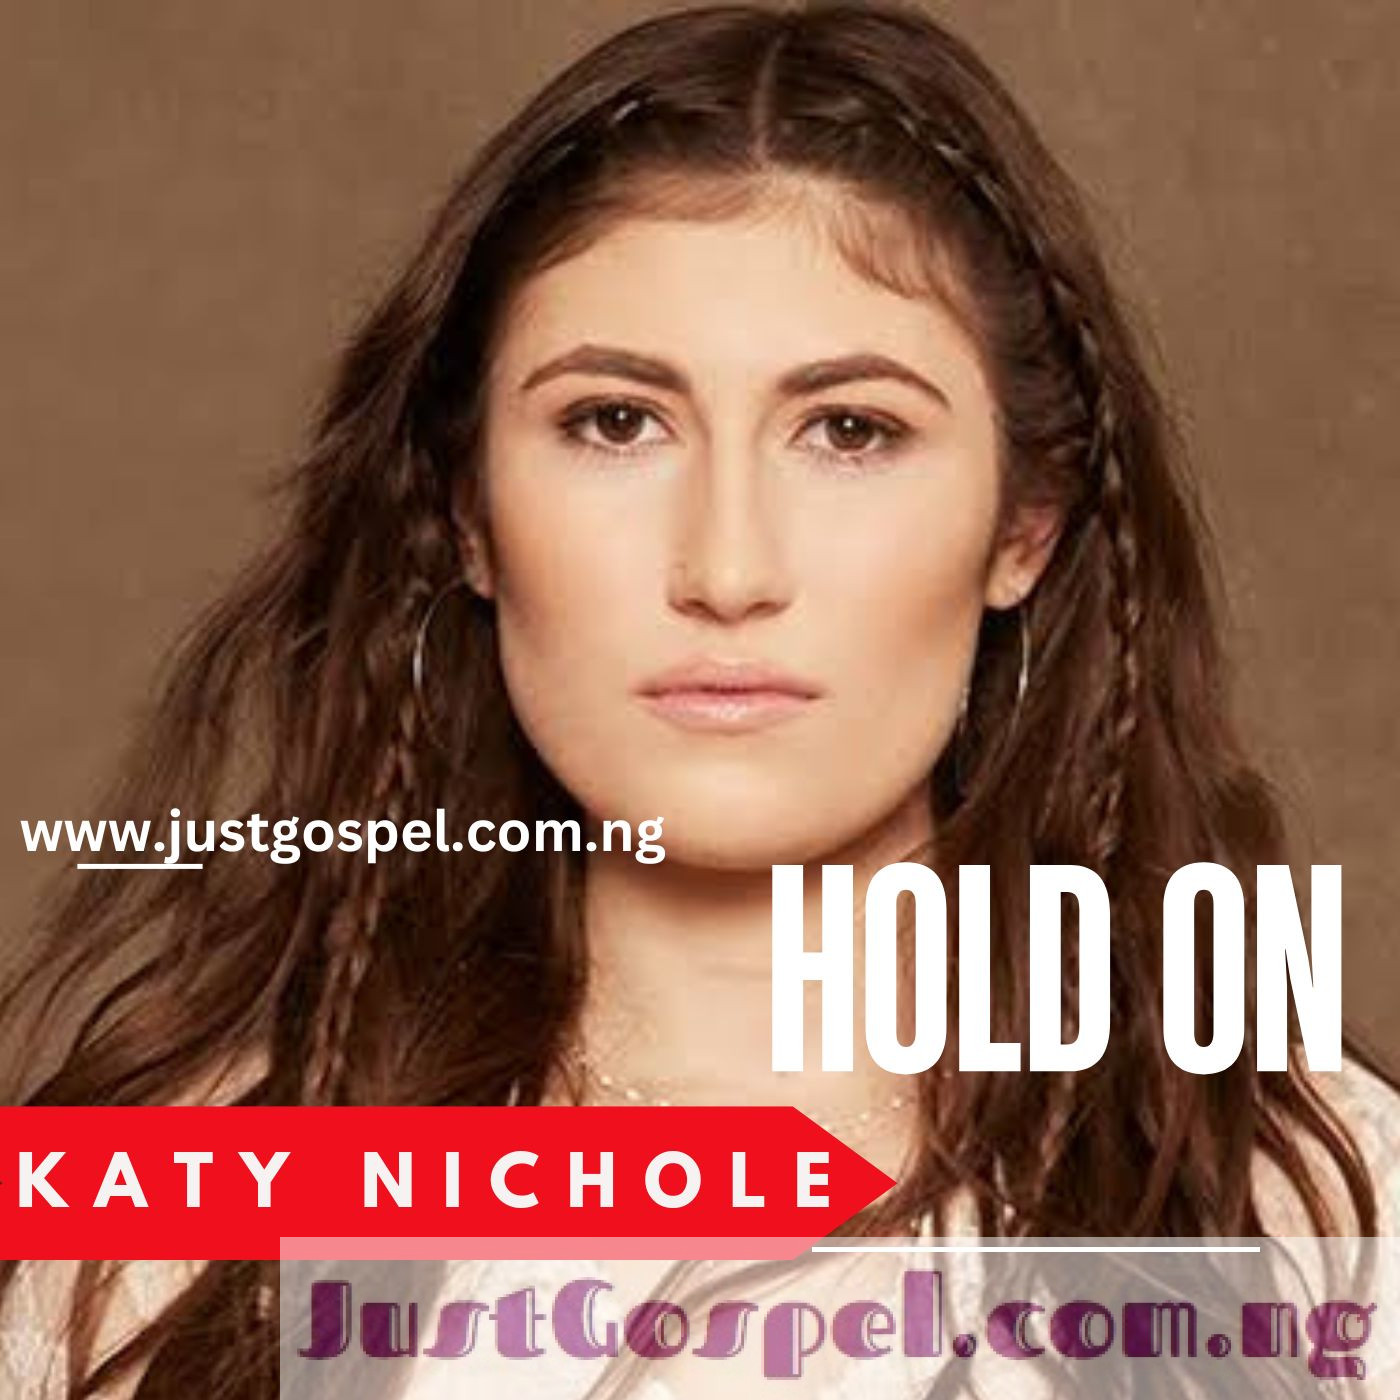 DOWNLOAD: Katy Nichole – Hold On